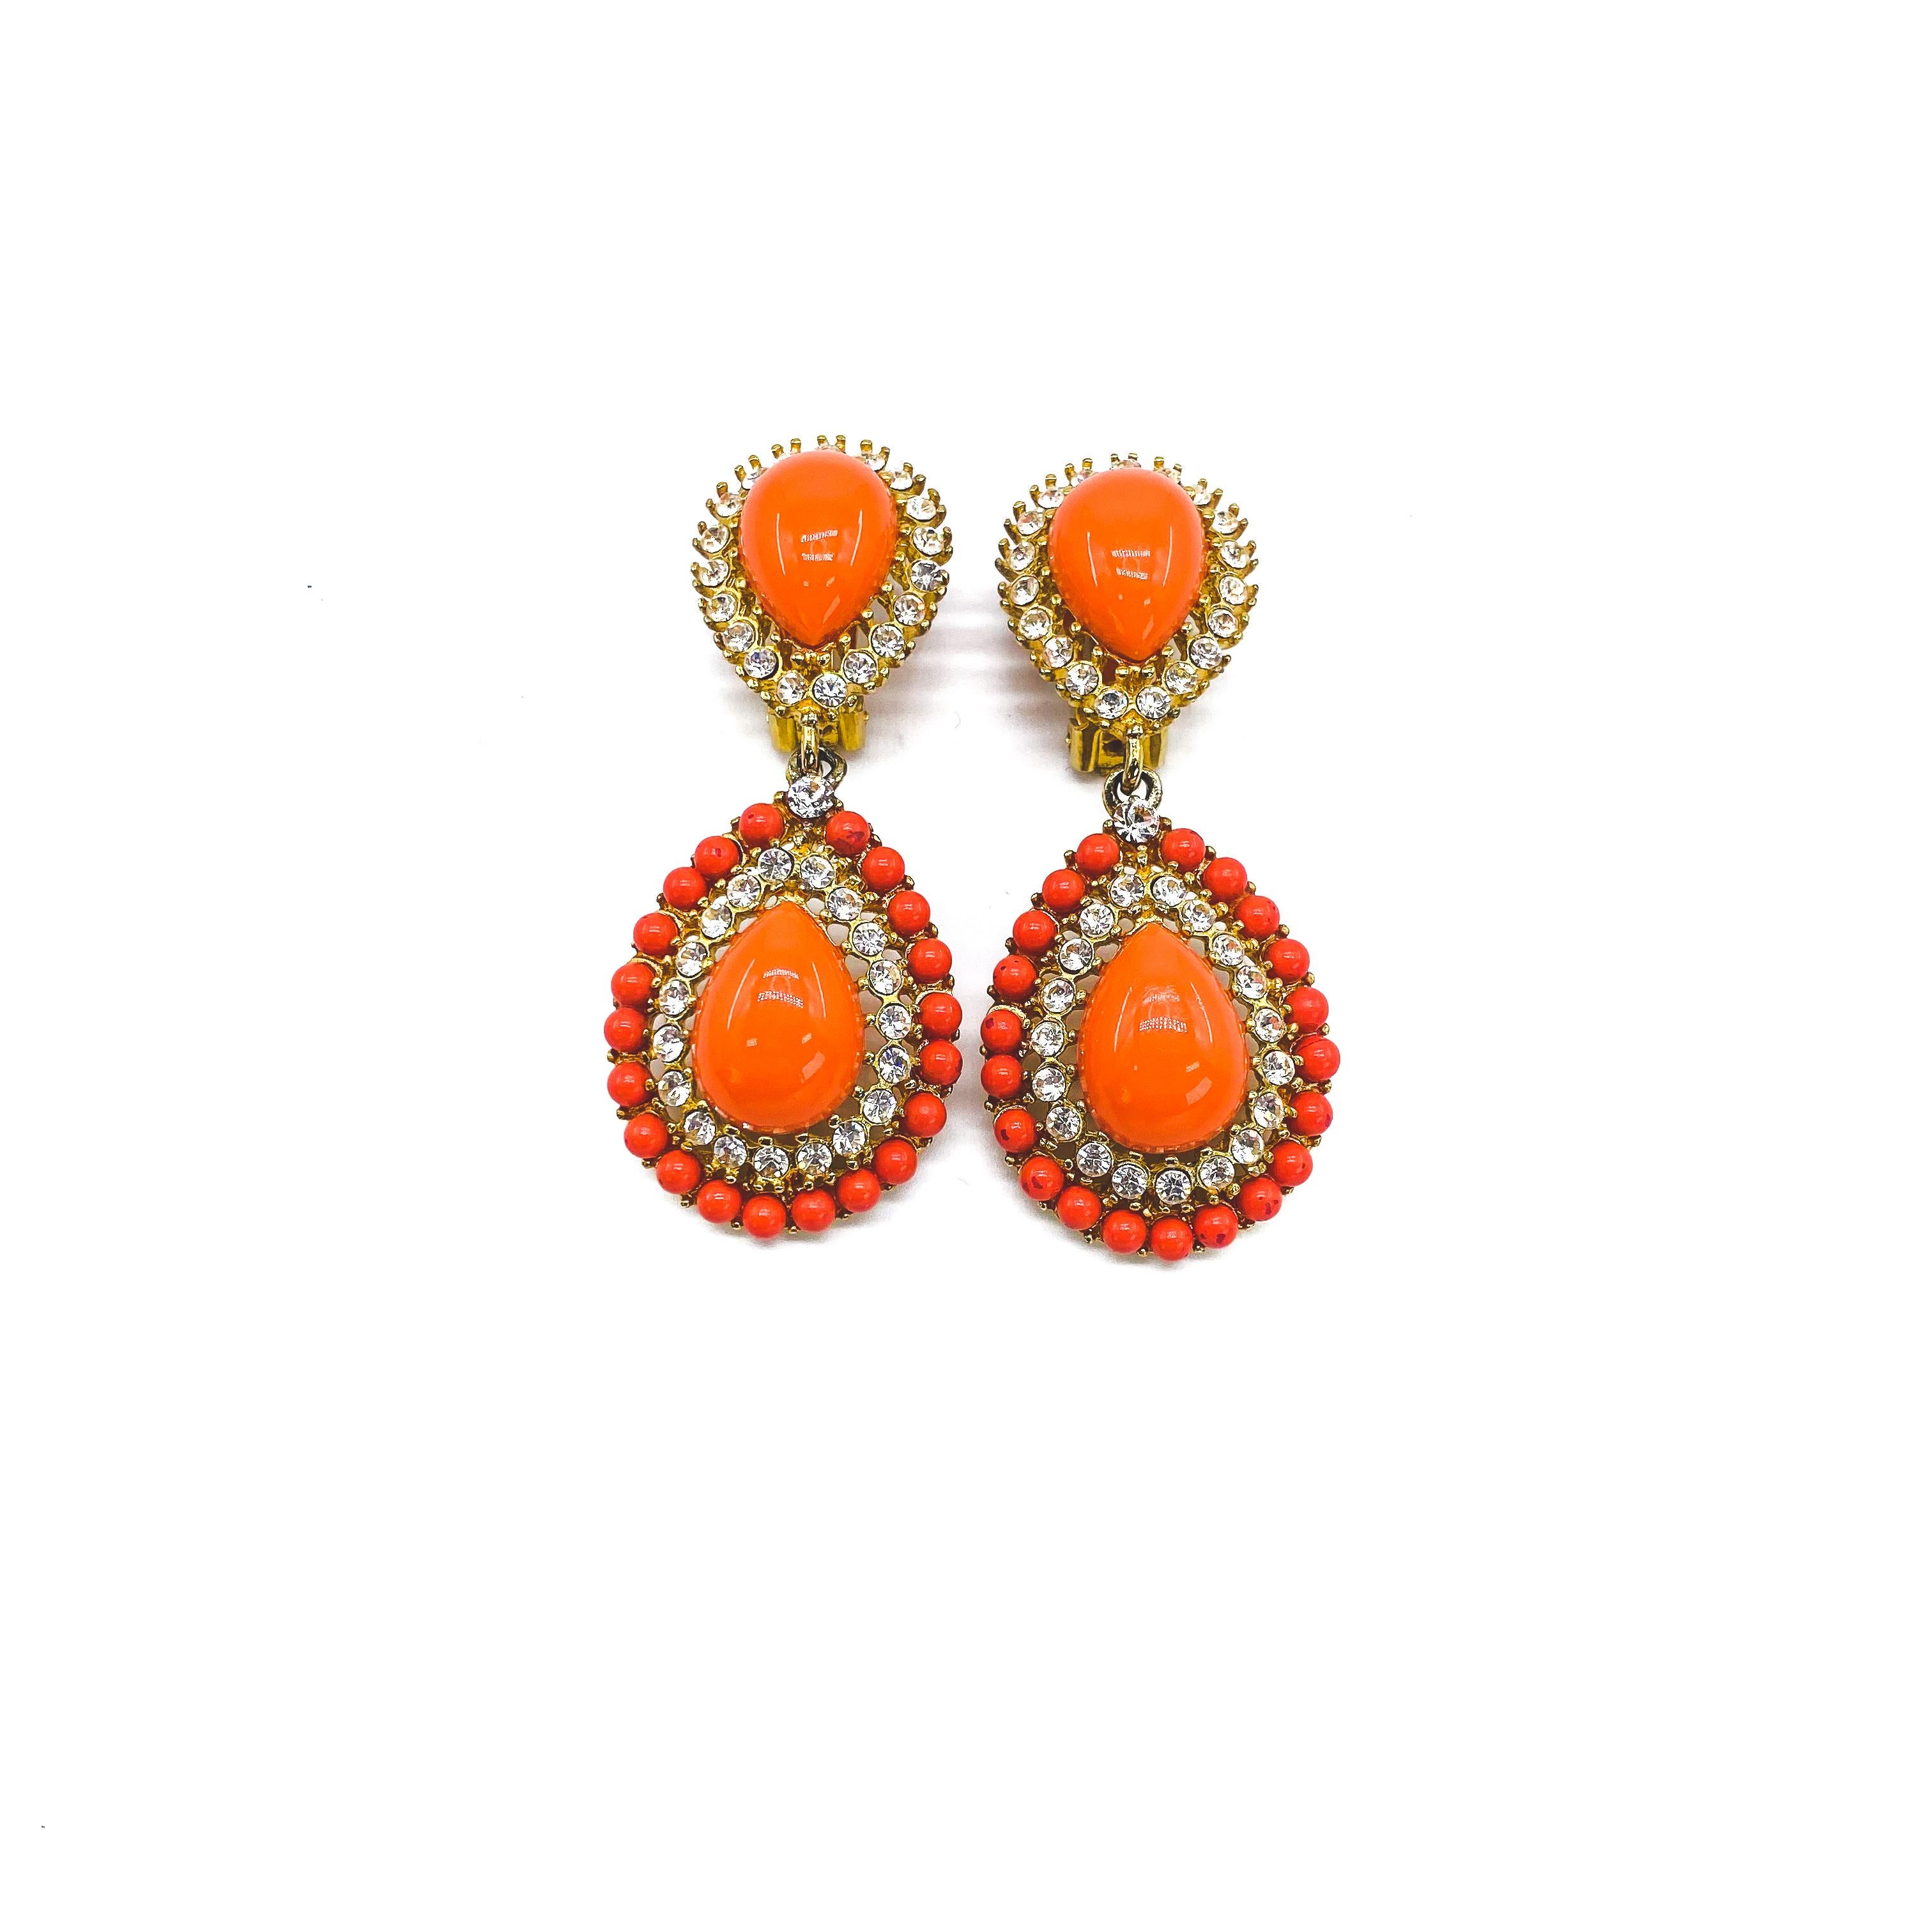 Kenneth Jay Lane Vintage 1990s Clip On Earrings

Beautiful crystal encrusted drop earrings from Kenneth Jay Lane - America's most famous costume jeweller.

Detail
-Crafted in a rich coral coloured lucite  
-Formed of two teardrops set with sparkling